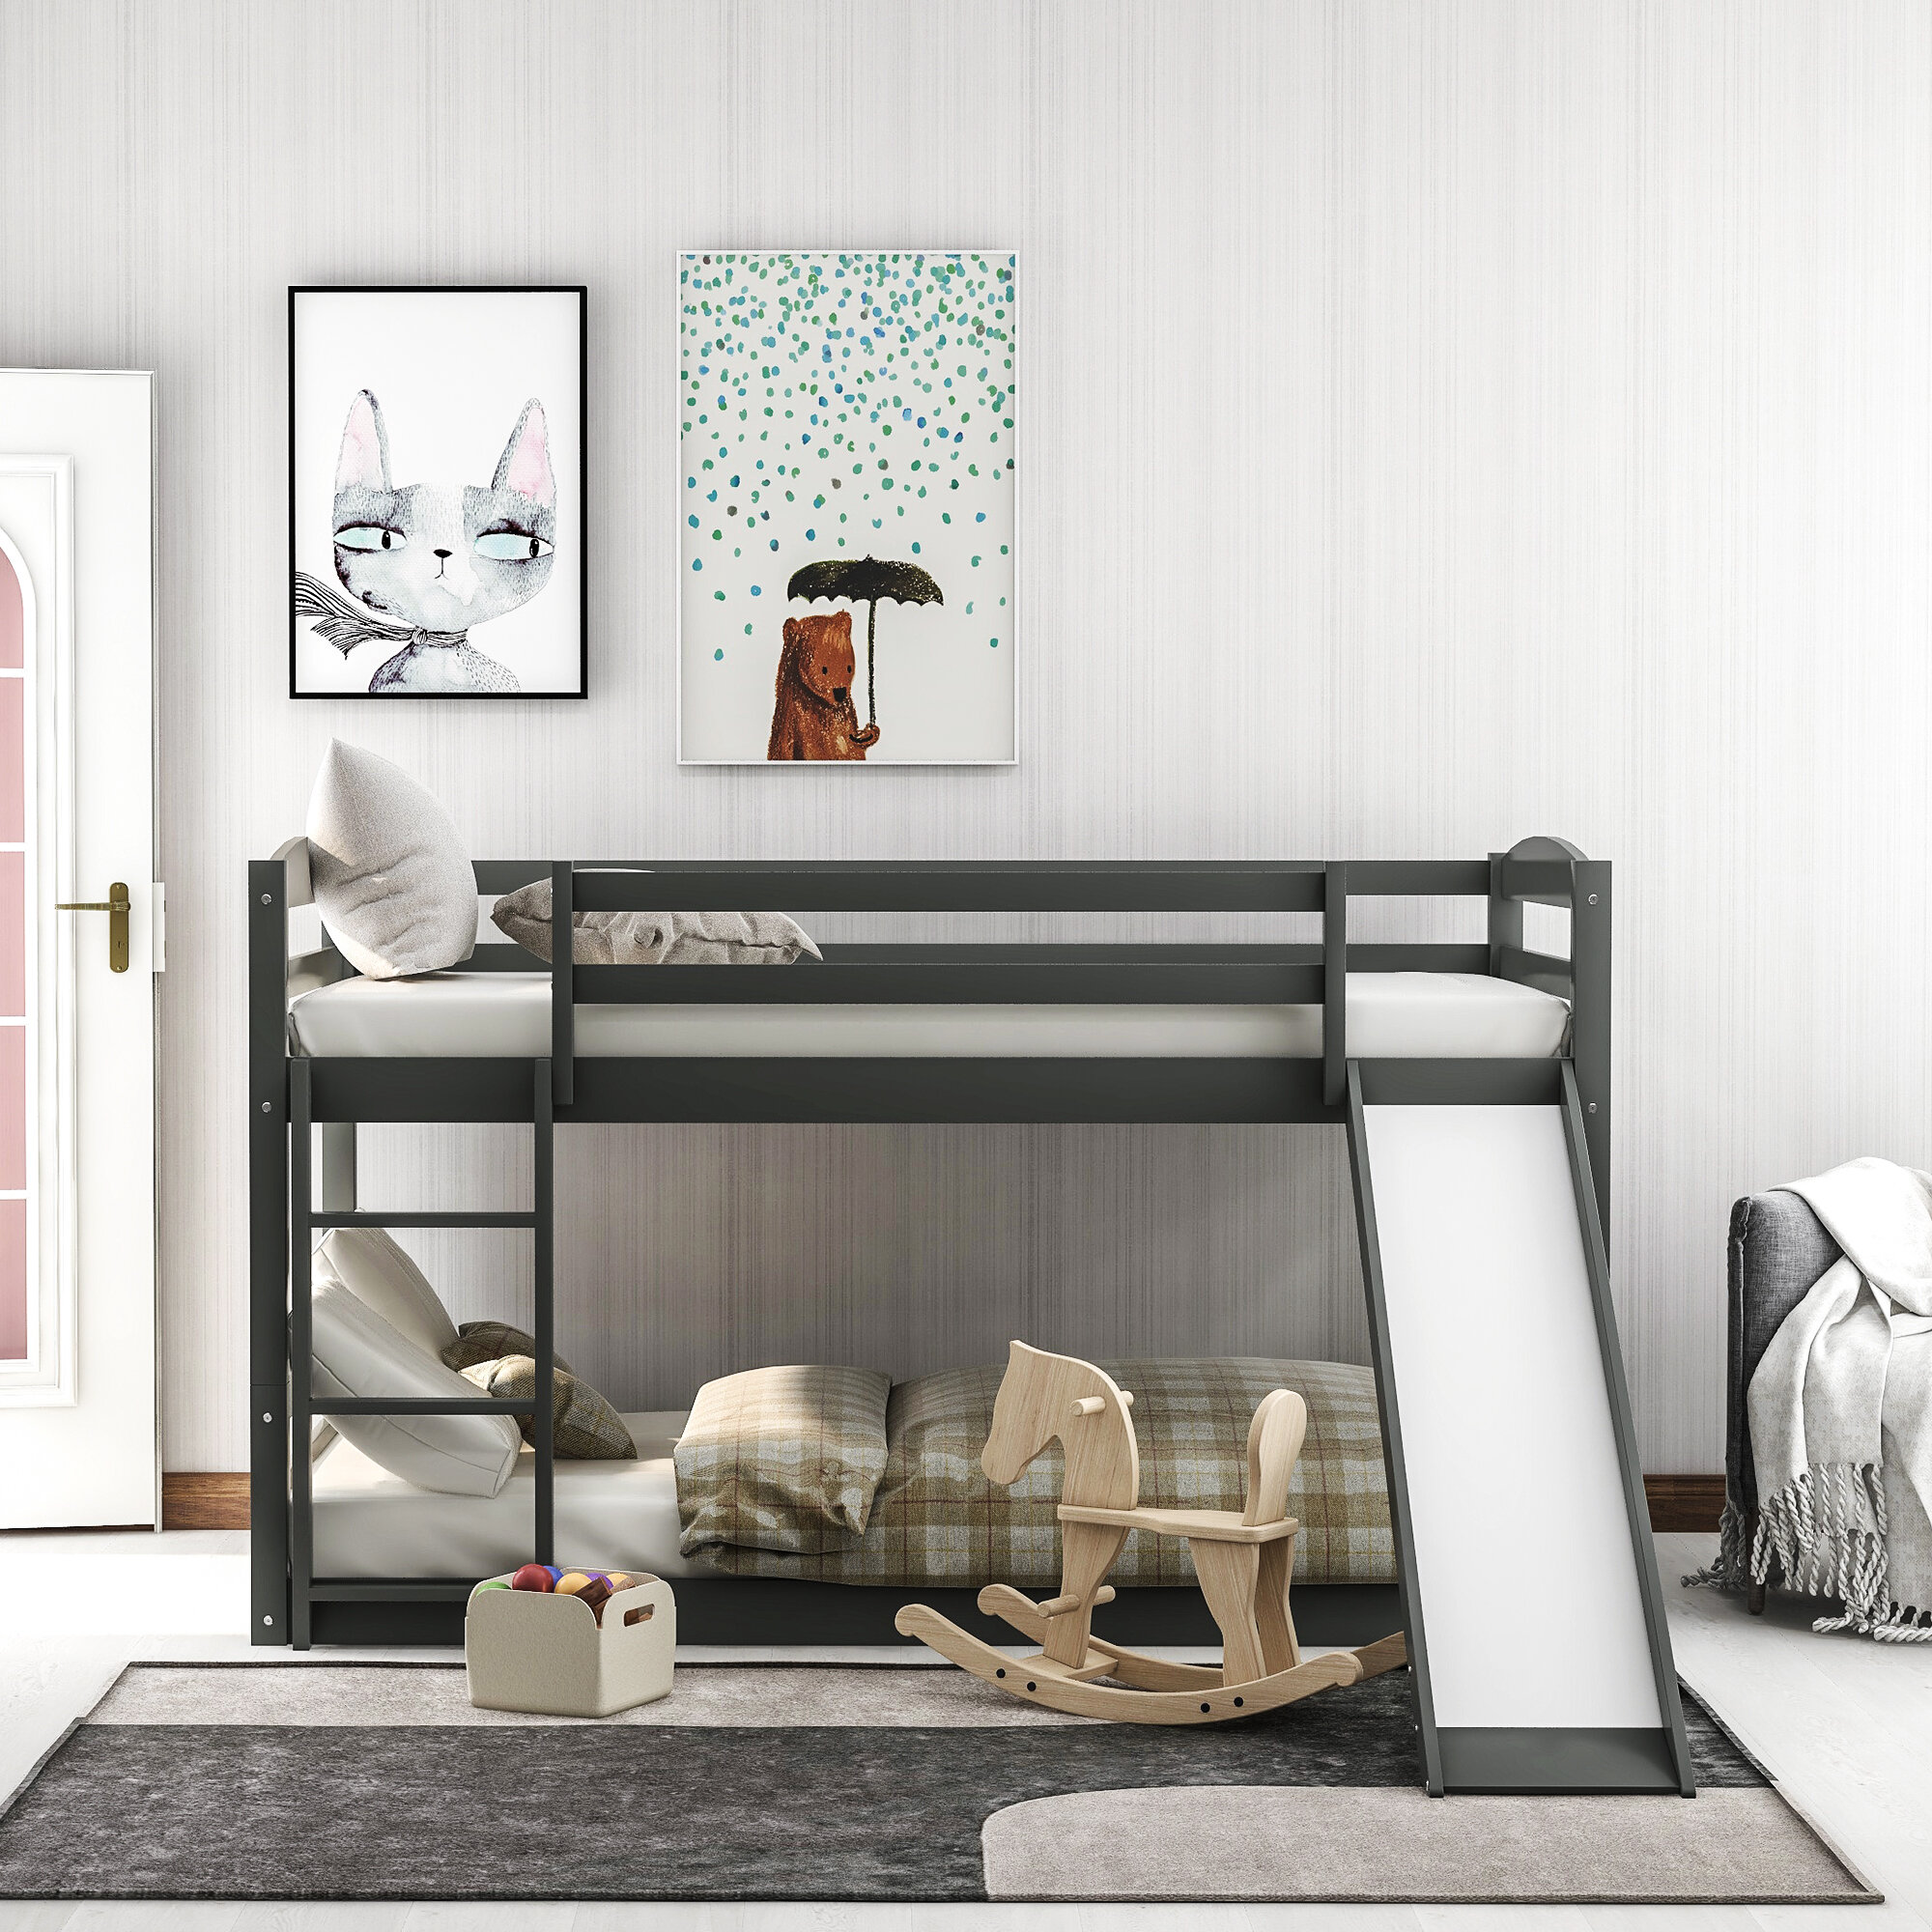 twin over twin loft bunk bed